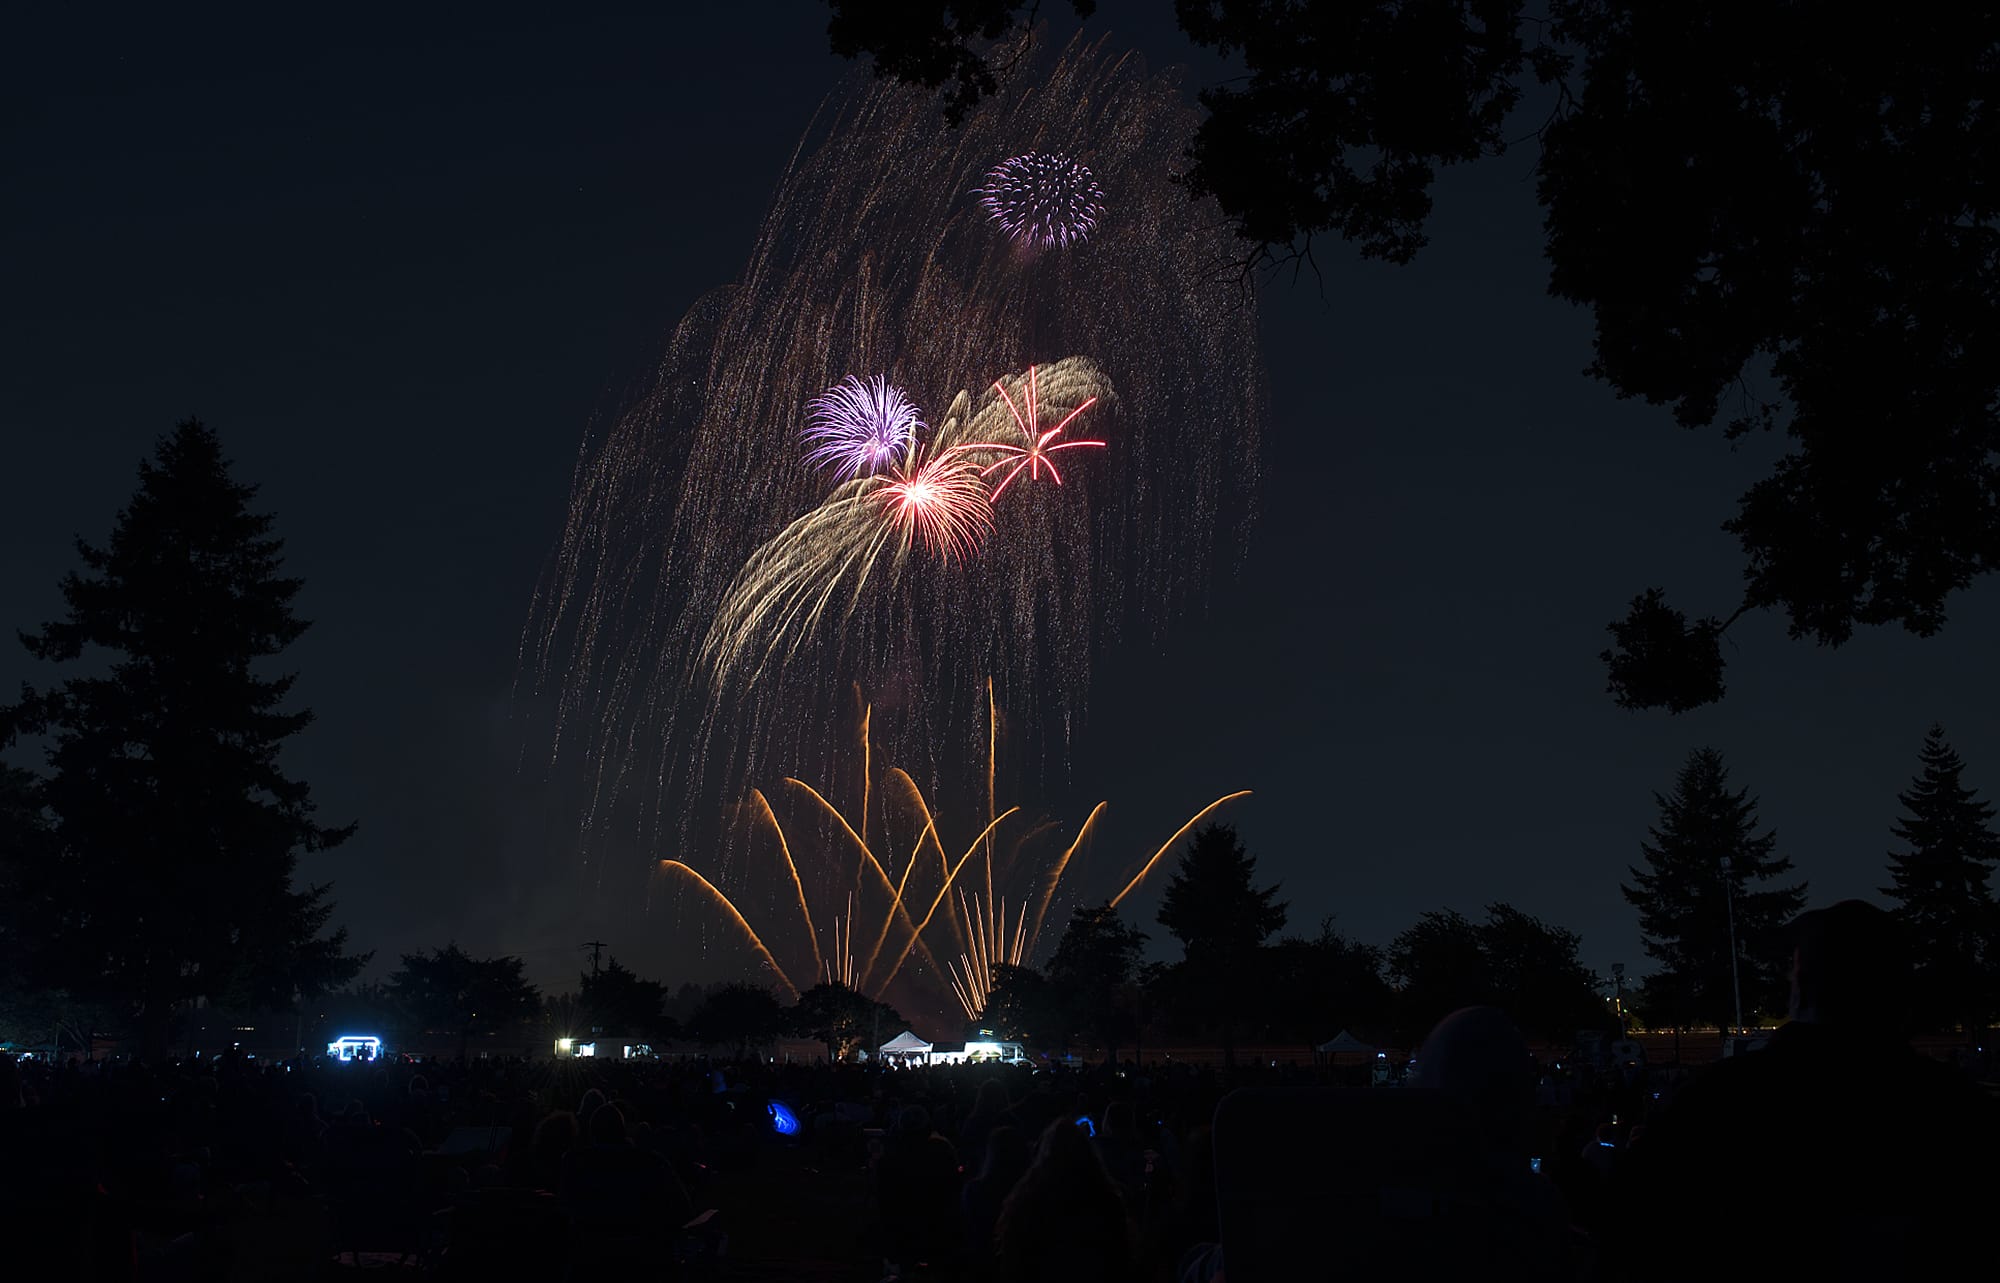 Fireworks light the night sky to the delight of the crowd during Fourth of July festivities at Fort Vancouver National Historic Site on Thursday evening, July 4, 2019.